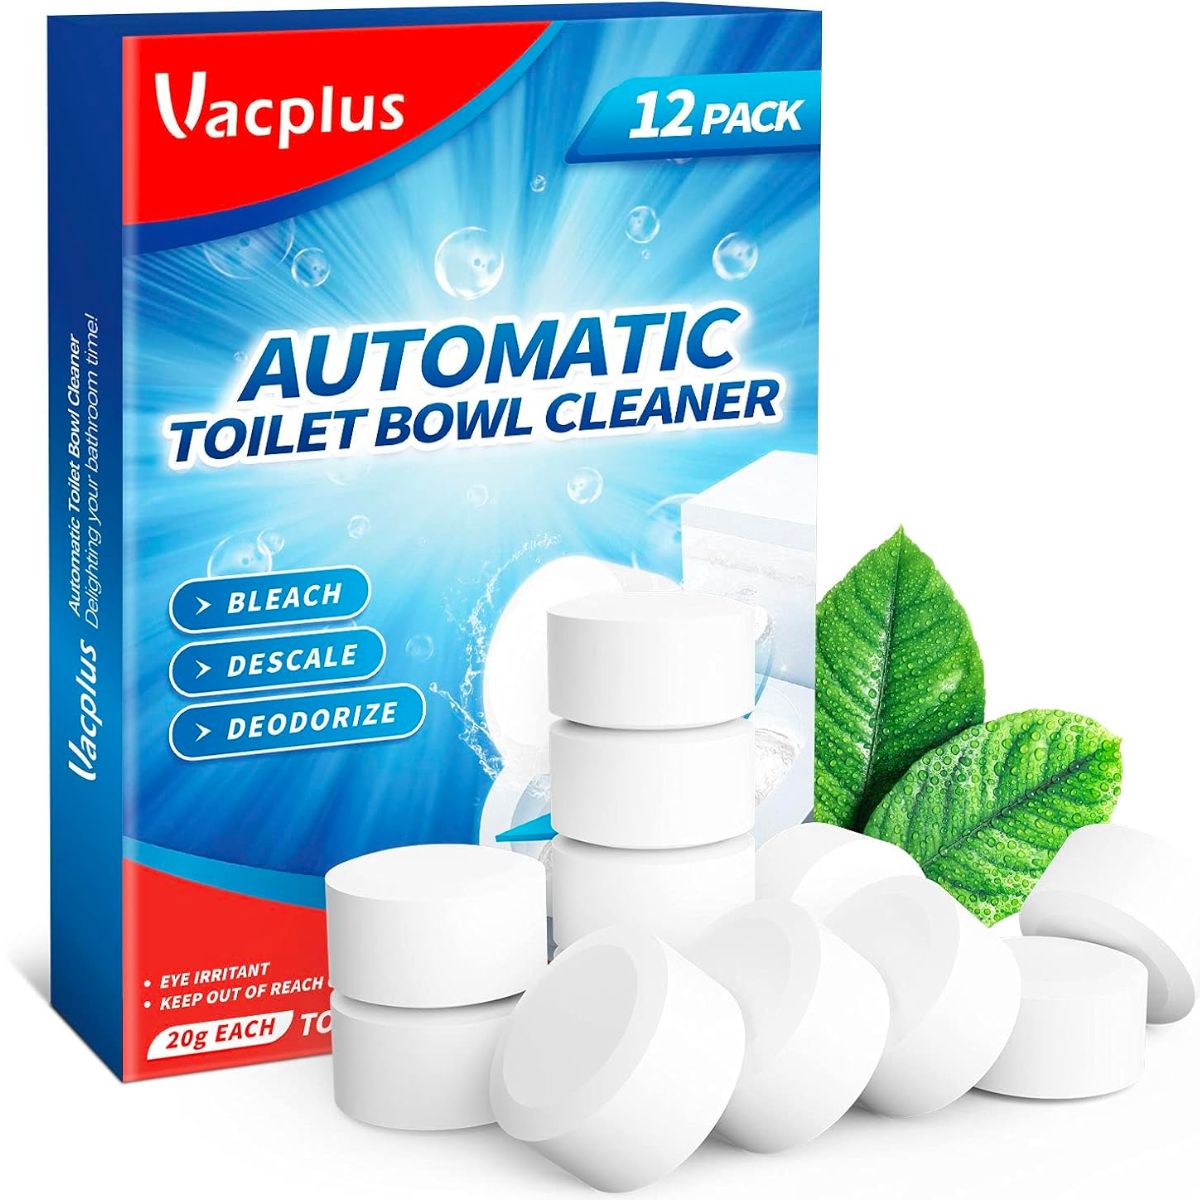 Vacplus Automatic Toilet Bowl Cleaner Tablets 12-Pack displayed with mint leaves stock image